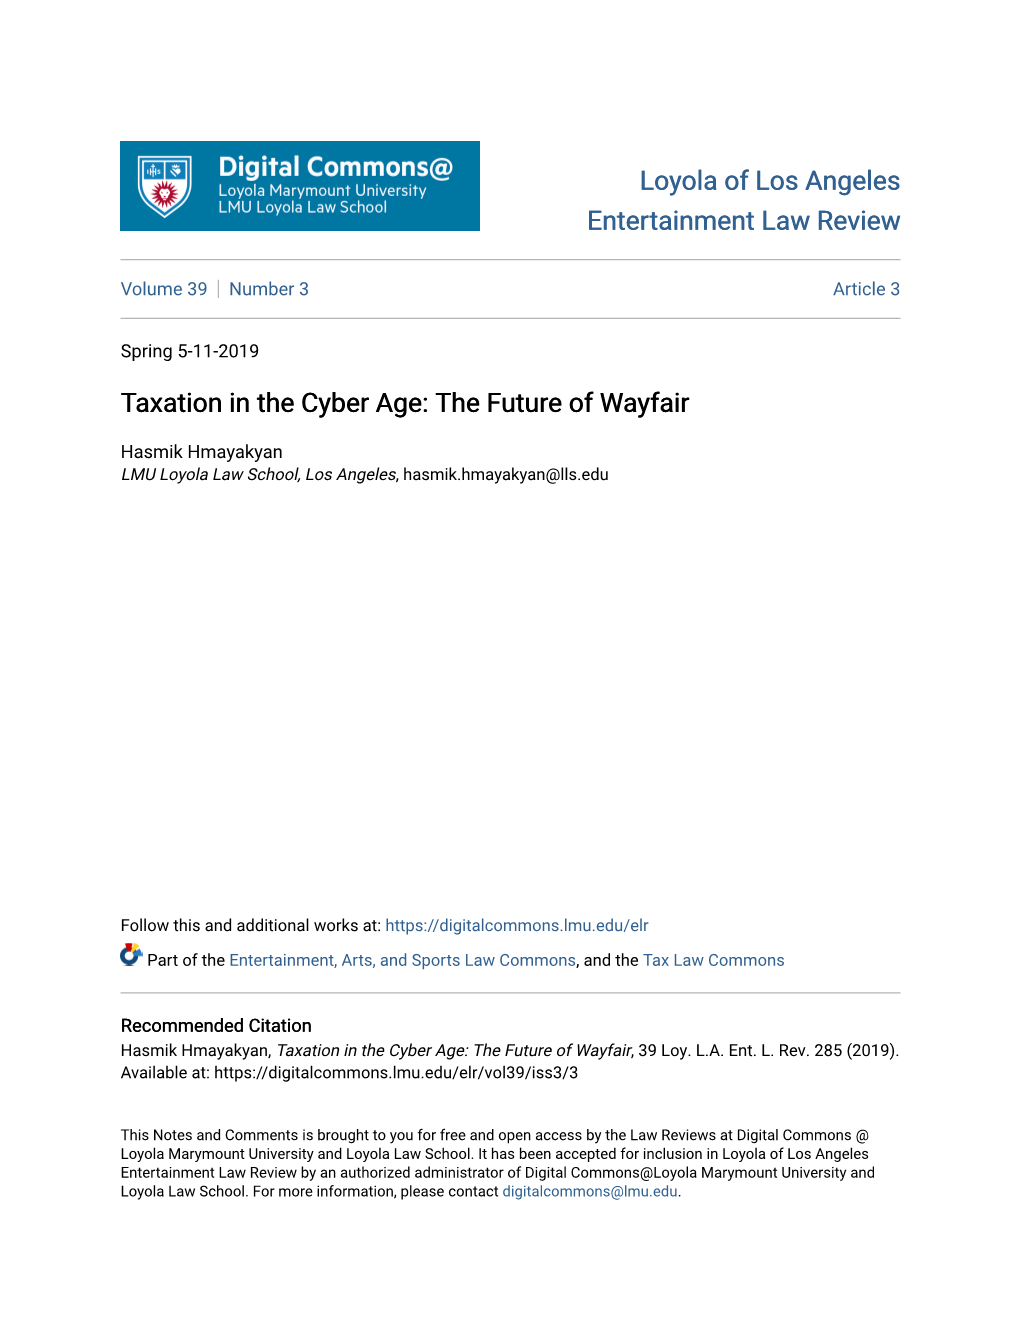 Taxation in the Cyber Age: the Future of Wayfair